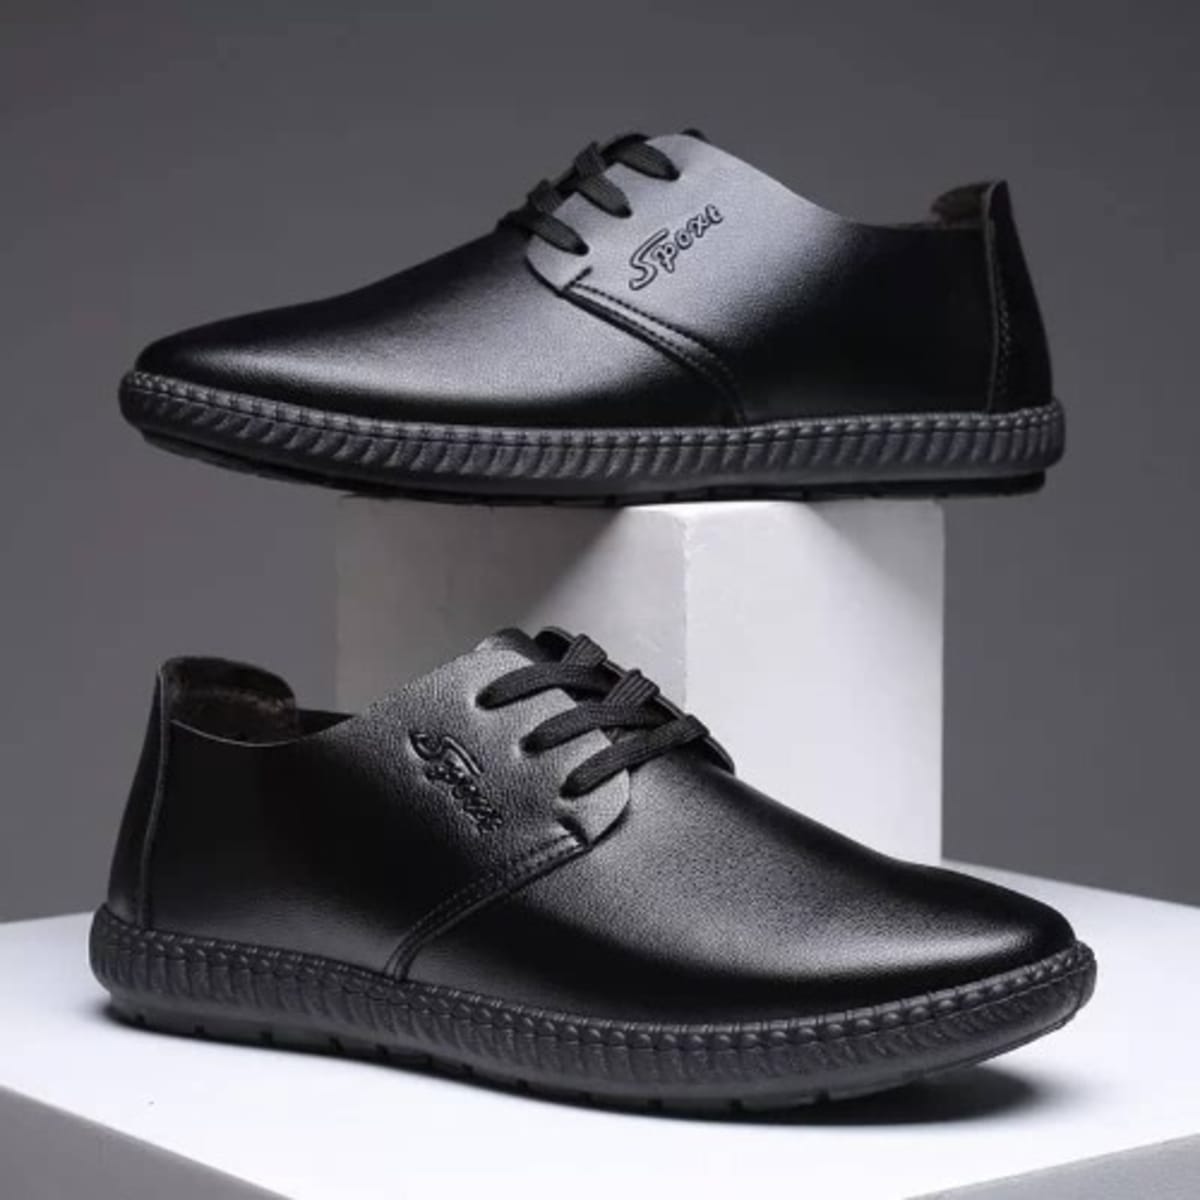 Discover 126+ office shoes for men latest - kenmei.edu.vn